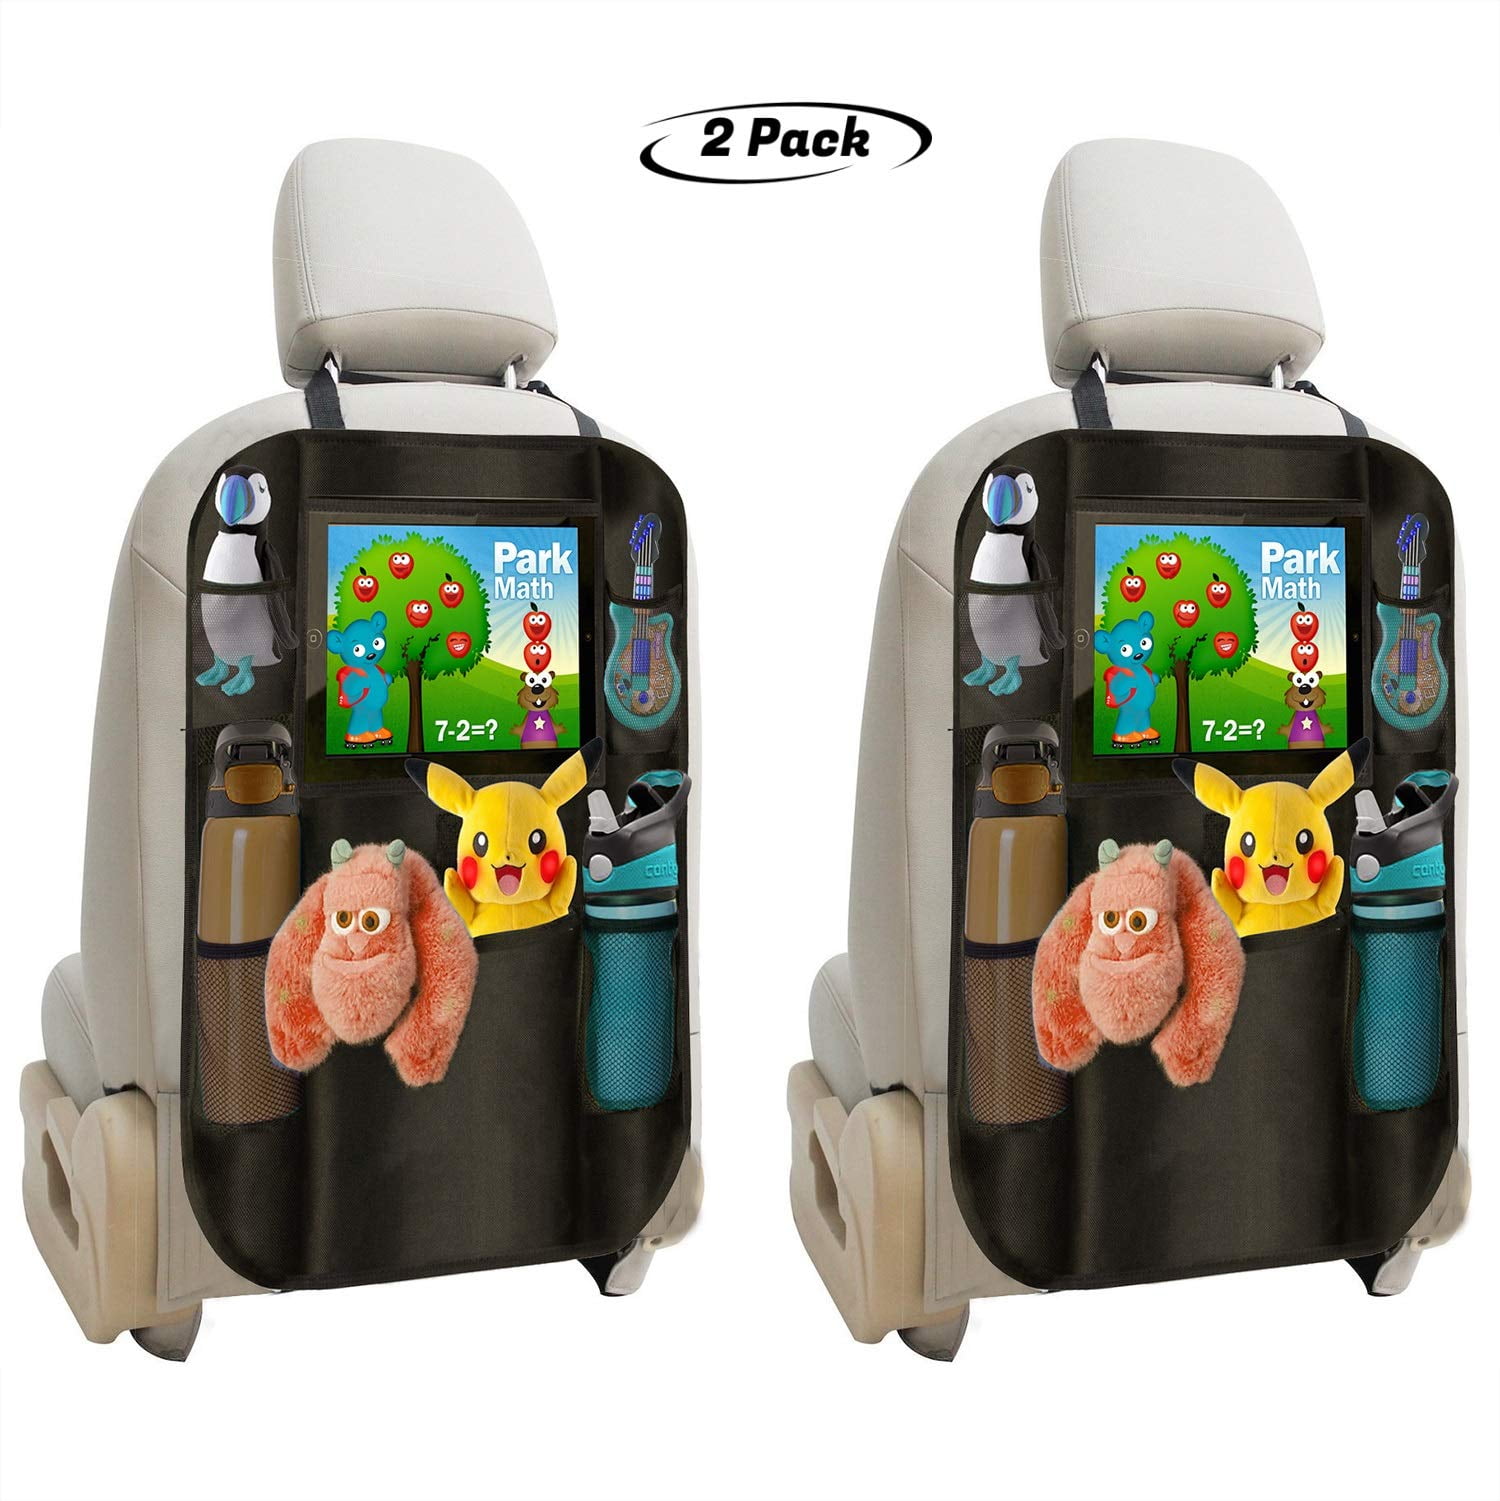 Multi-Pocket for Bottles Tissue Boxes Kids Toy Storage and Great Travel Accessory for Kids 2 Pack B OMorc Car Backseat Organizer with iPad Tablet Touch Screen Holder Kick Mat Seat Back Protector